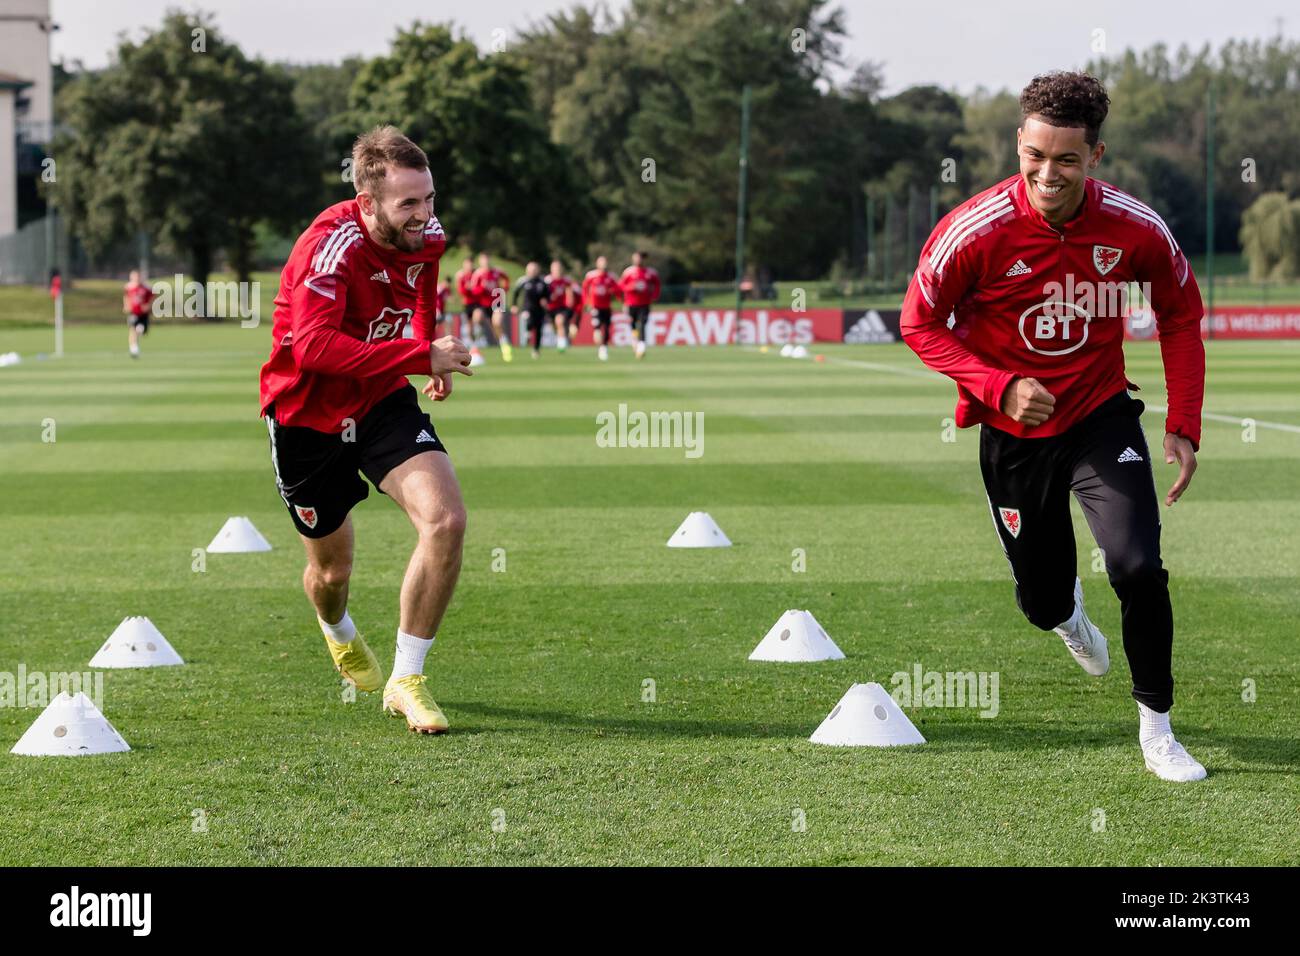 PONTYCLUN, WALES - 20 SEPTEMBER 2022: Wales' Rhys Norrington-Davies and Wales' Brennan Johnson  during a training session at the vale resort ahead of Stock Photo